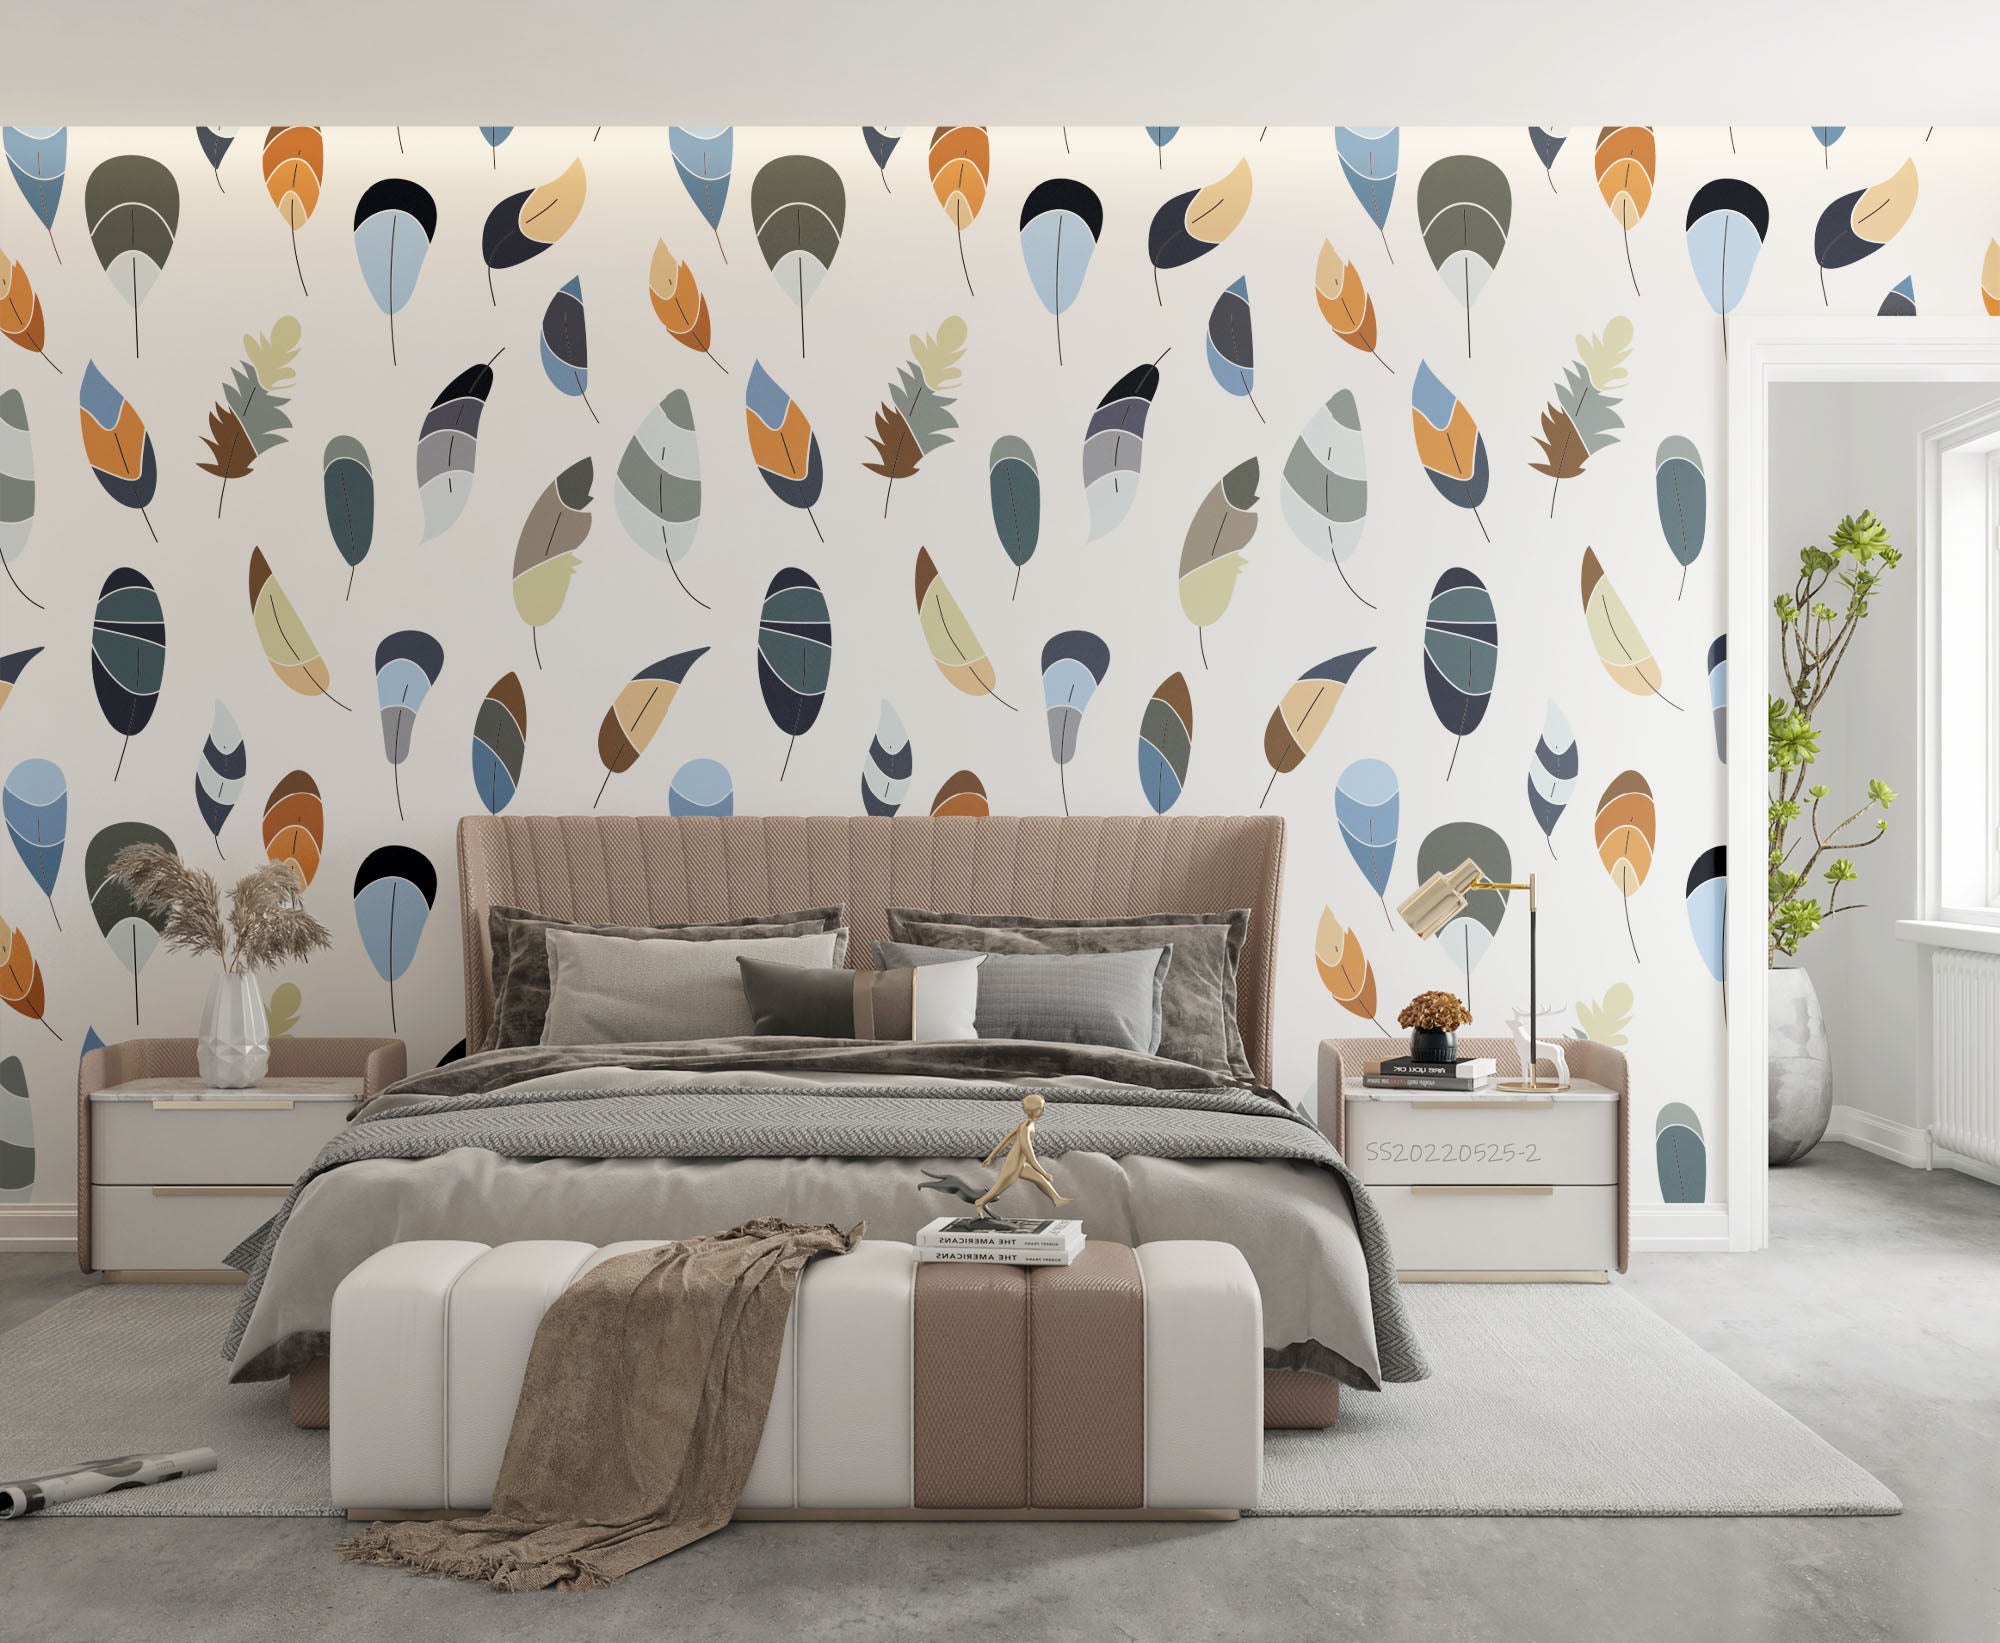 3D Vintage Abstract Feather Pattern Wall Mural Wallpaper GD 122- Jess Art Decoration